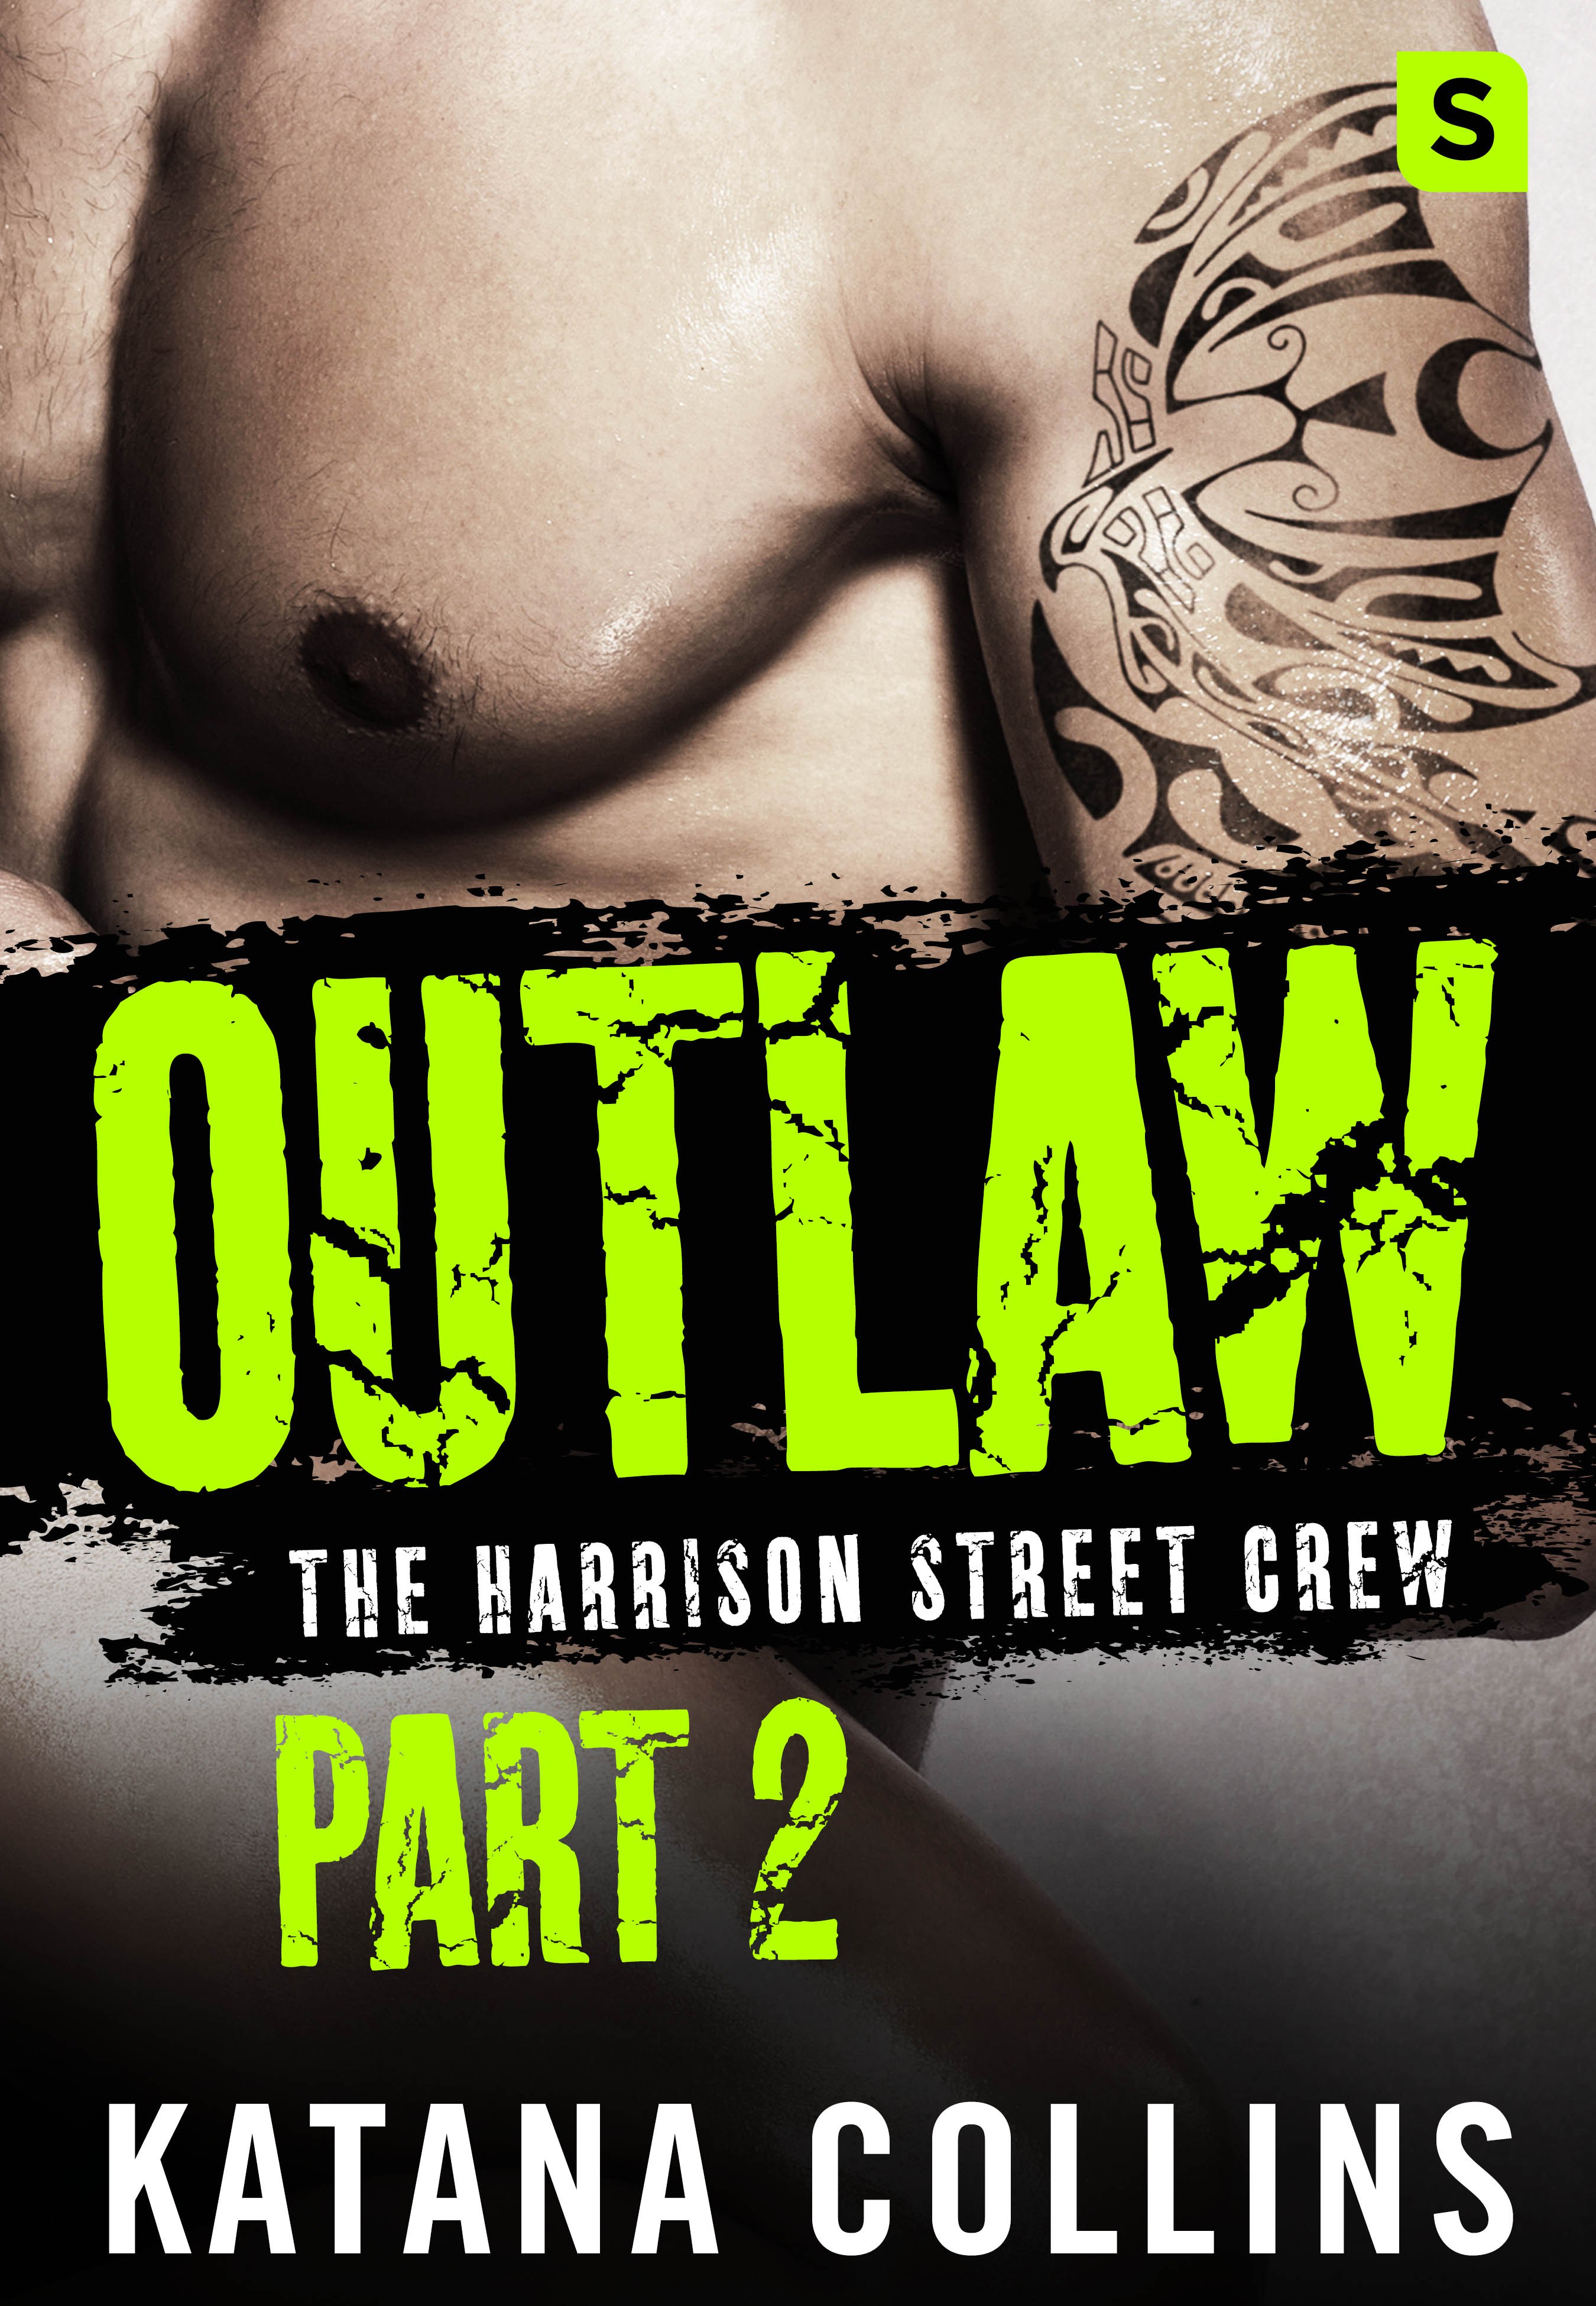 Outlaw Part 2 by Katana Collins